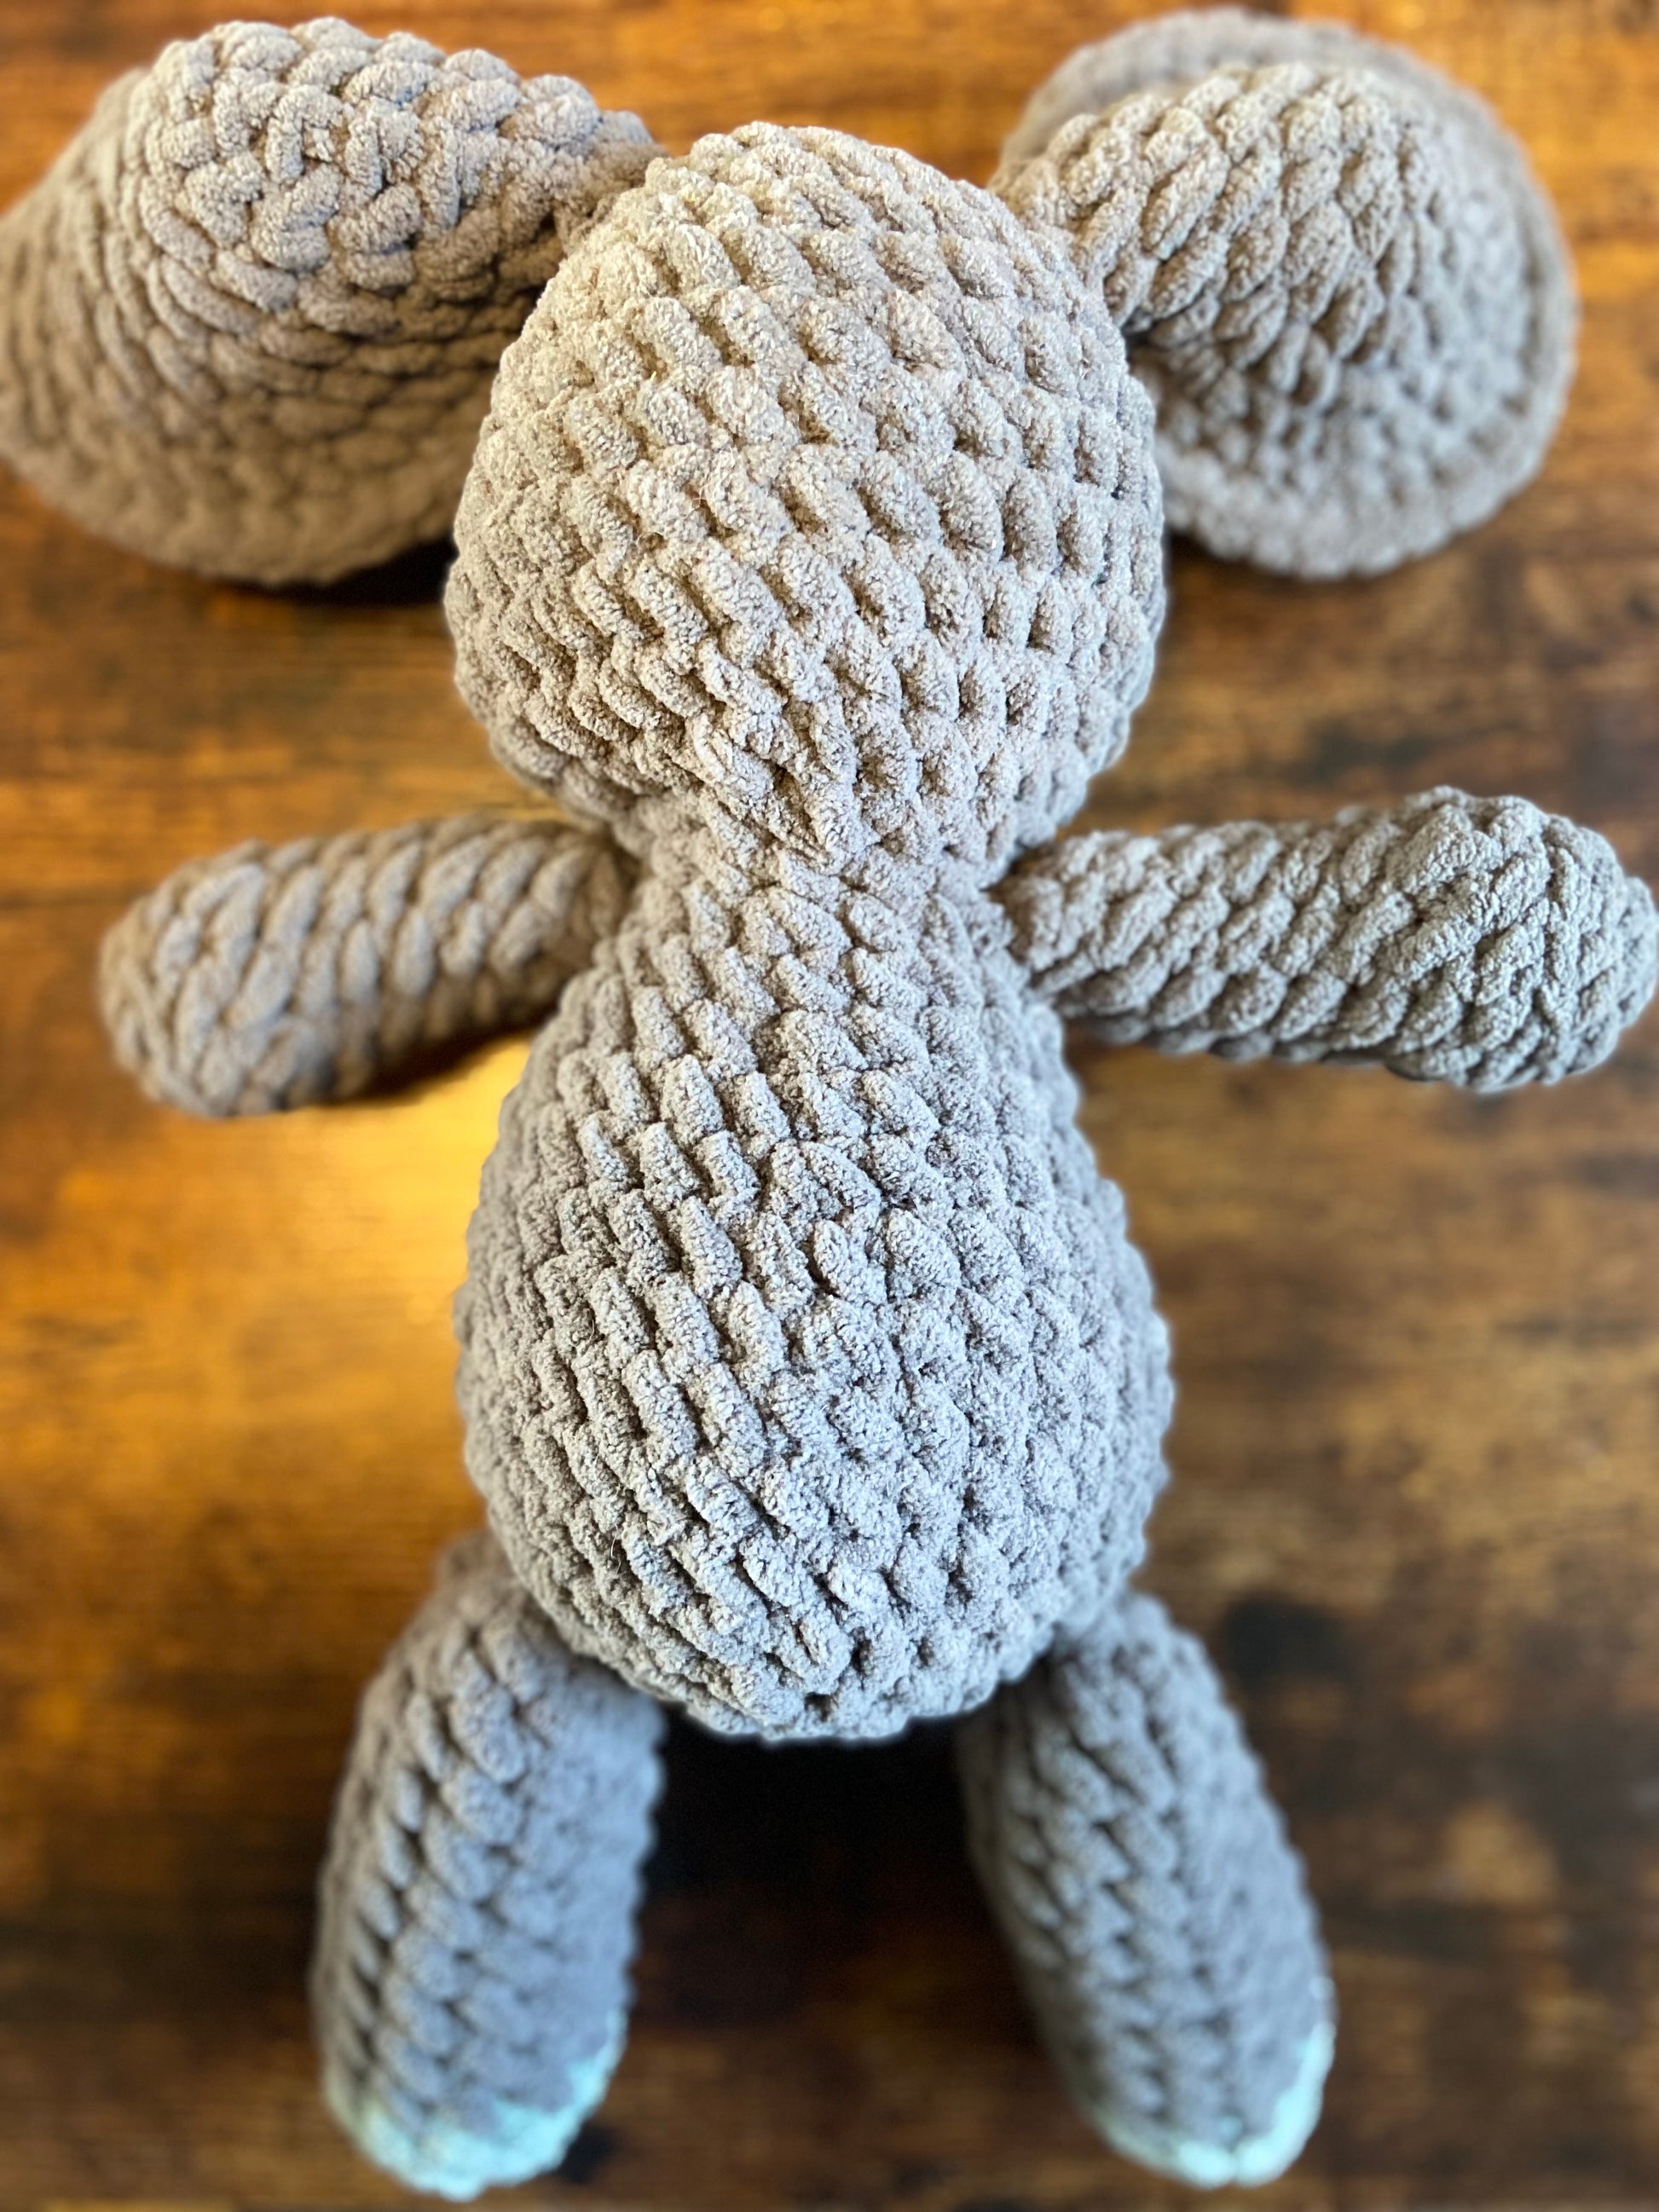 Crochet elephant toy: A cute and soft amigurumi elephant with gray body, floppy ears, and a playful expression, perfect for playtime and snuggling.